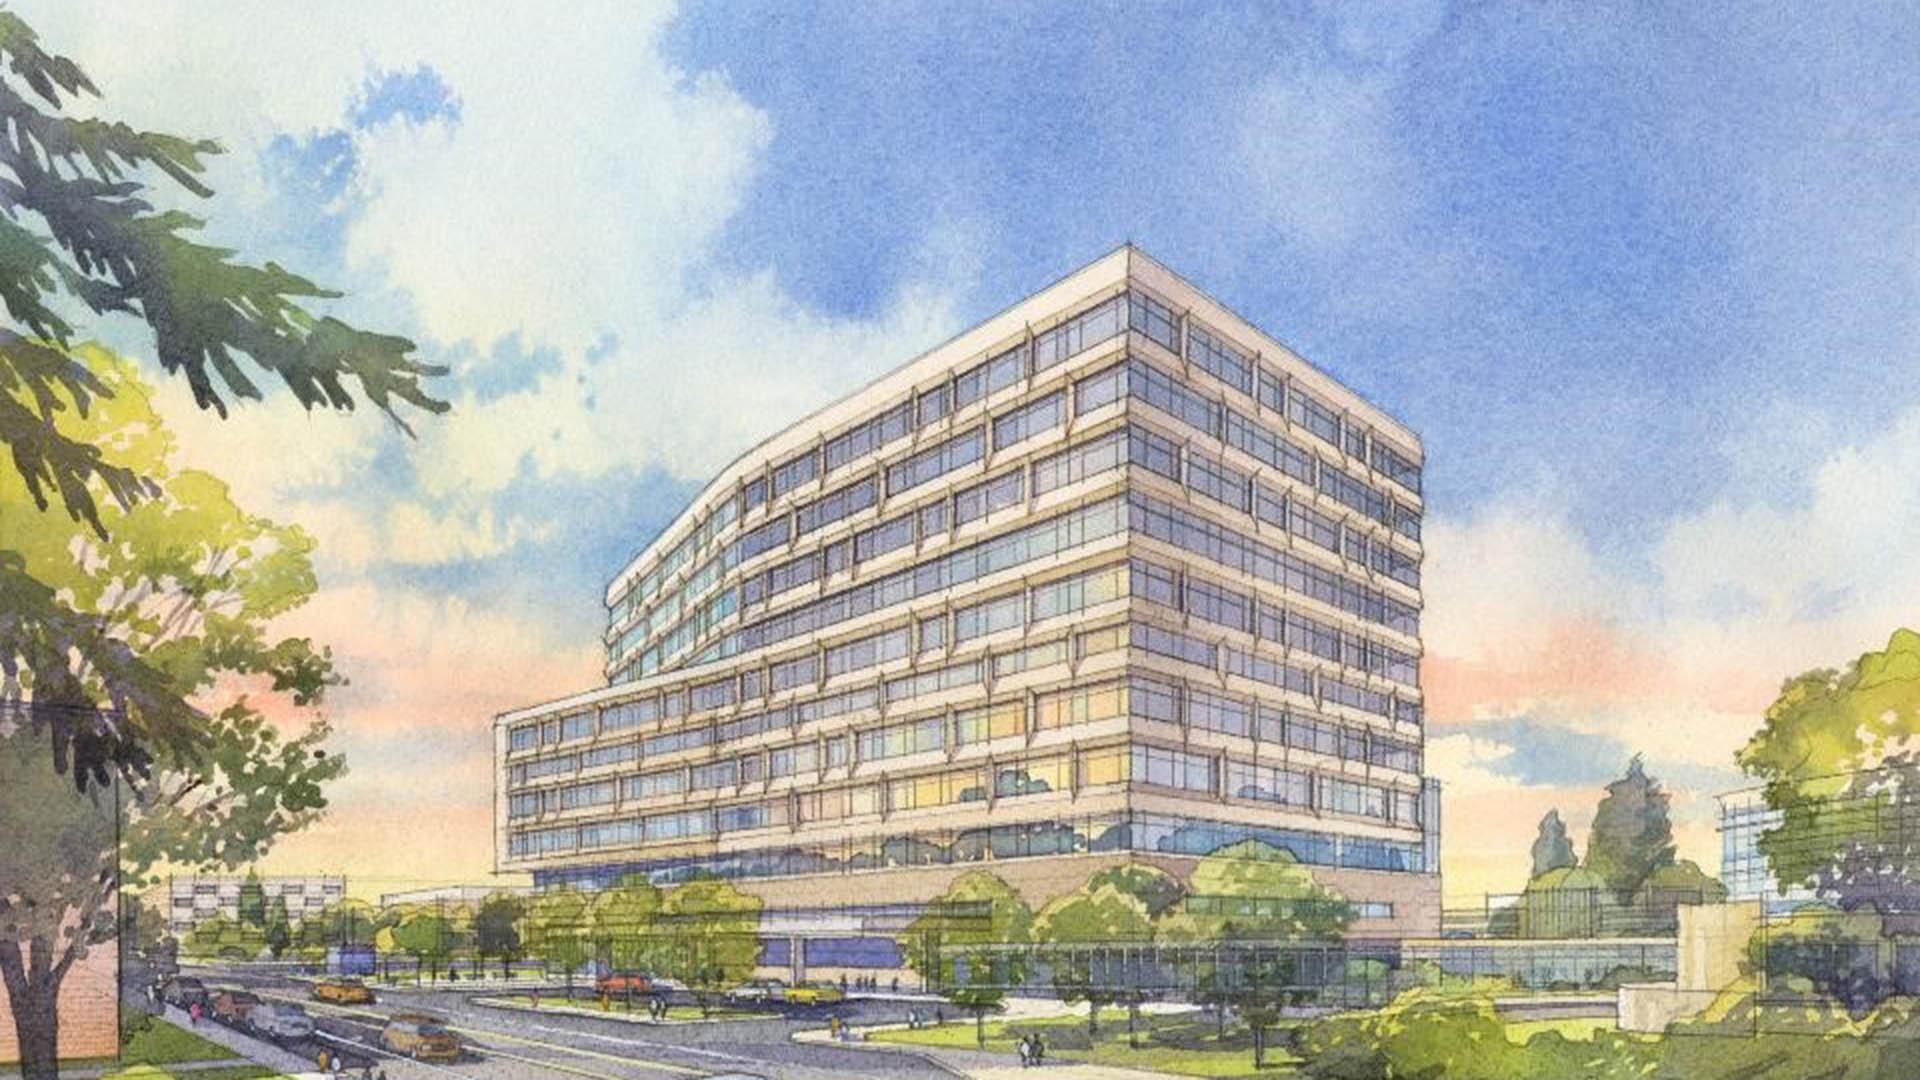 Architectural rendering of The Pavilion hospital building at University of Michigan Health